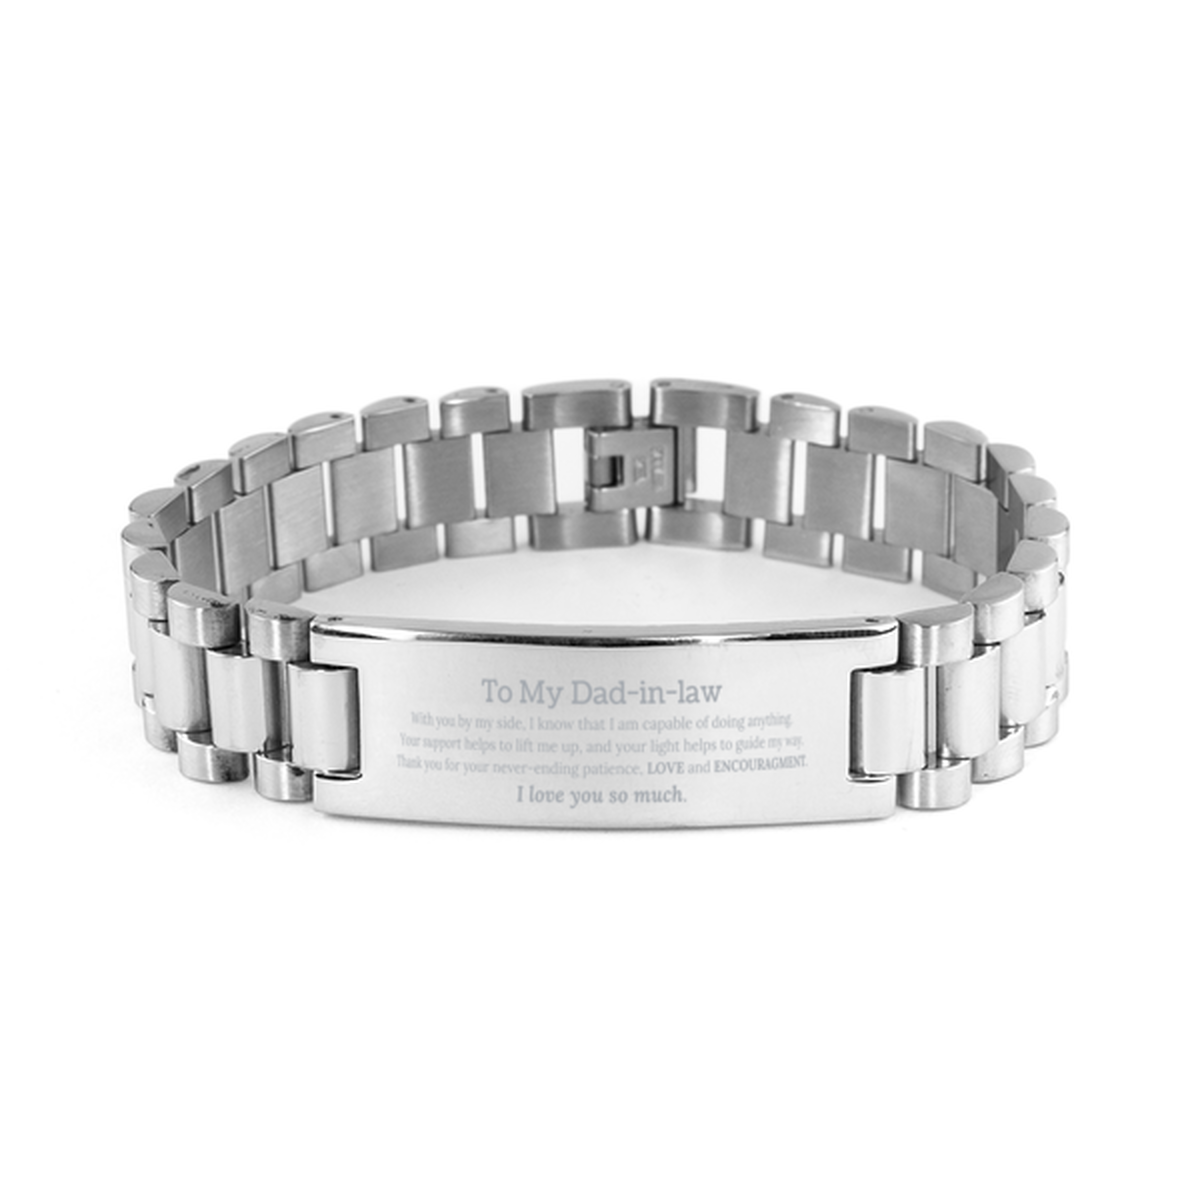 Appreciation Dad-in-law Ladder Stainless Steel Bracelet Gifts, To My Dad-in-law Birthday Christmas Wedding Keepsake Gifts for Dad-in-law With you by my side, I know that I am capable of doing anything. I love you so much